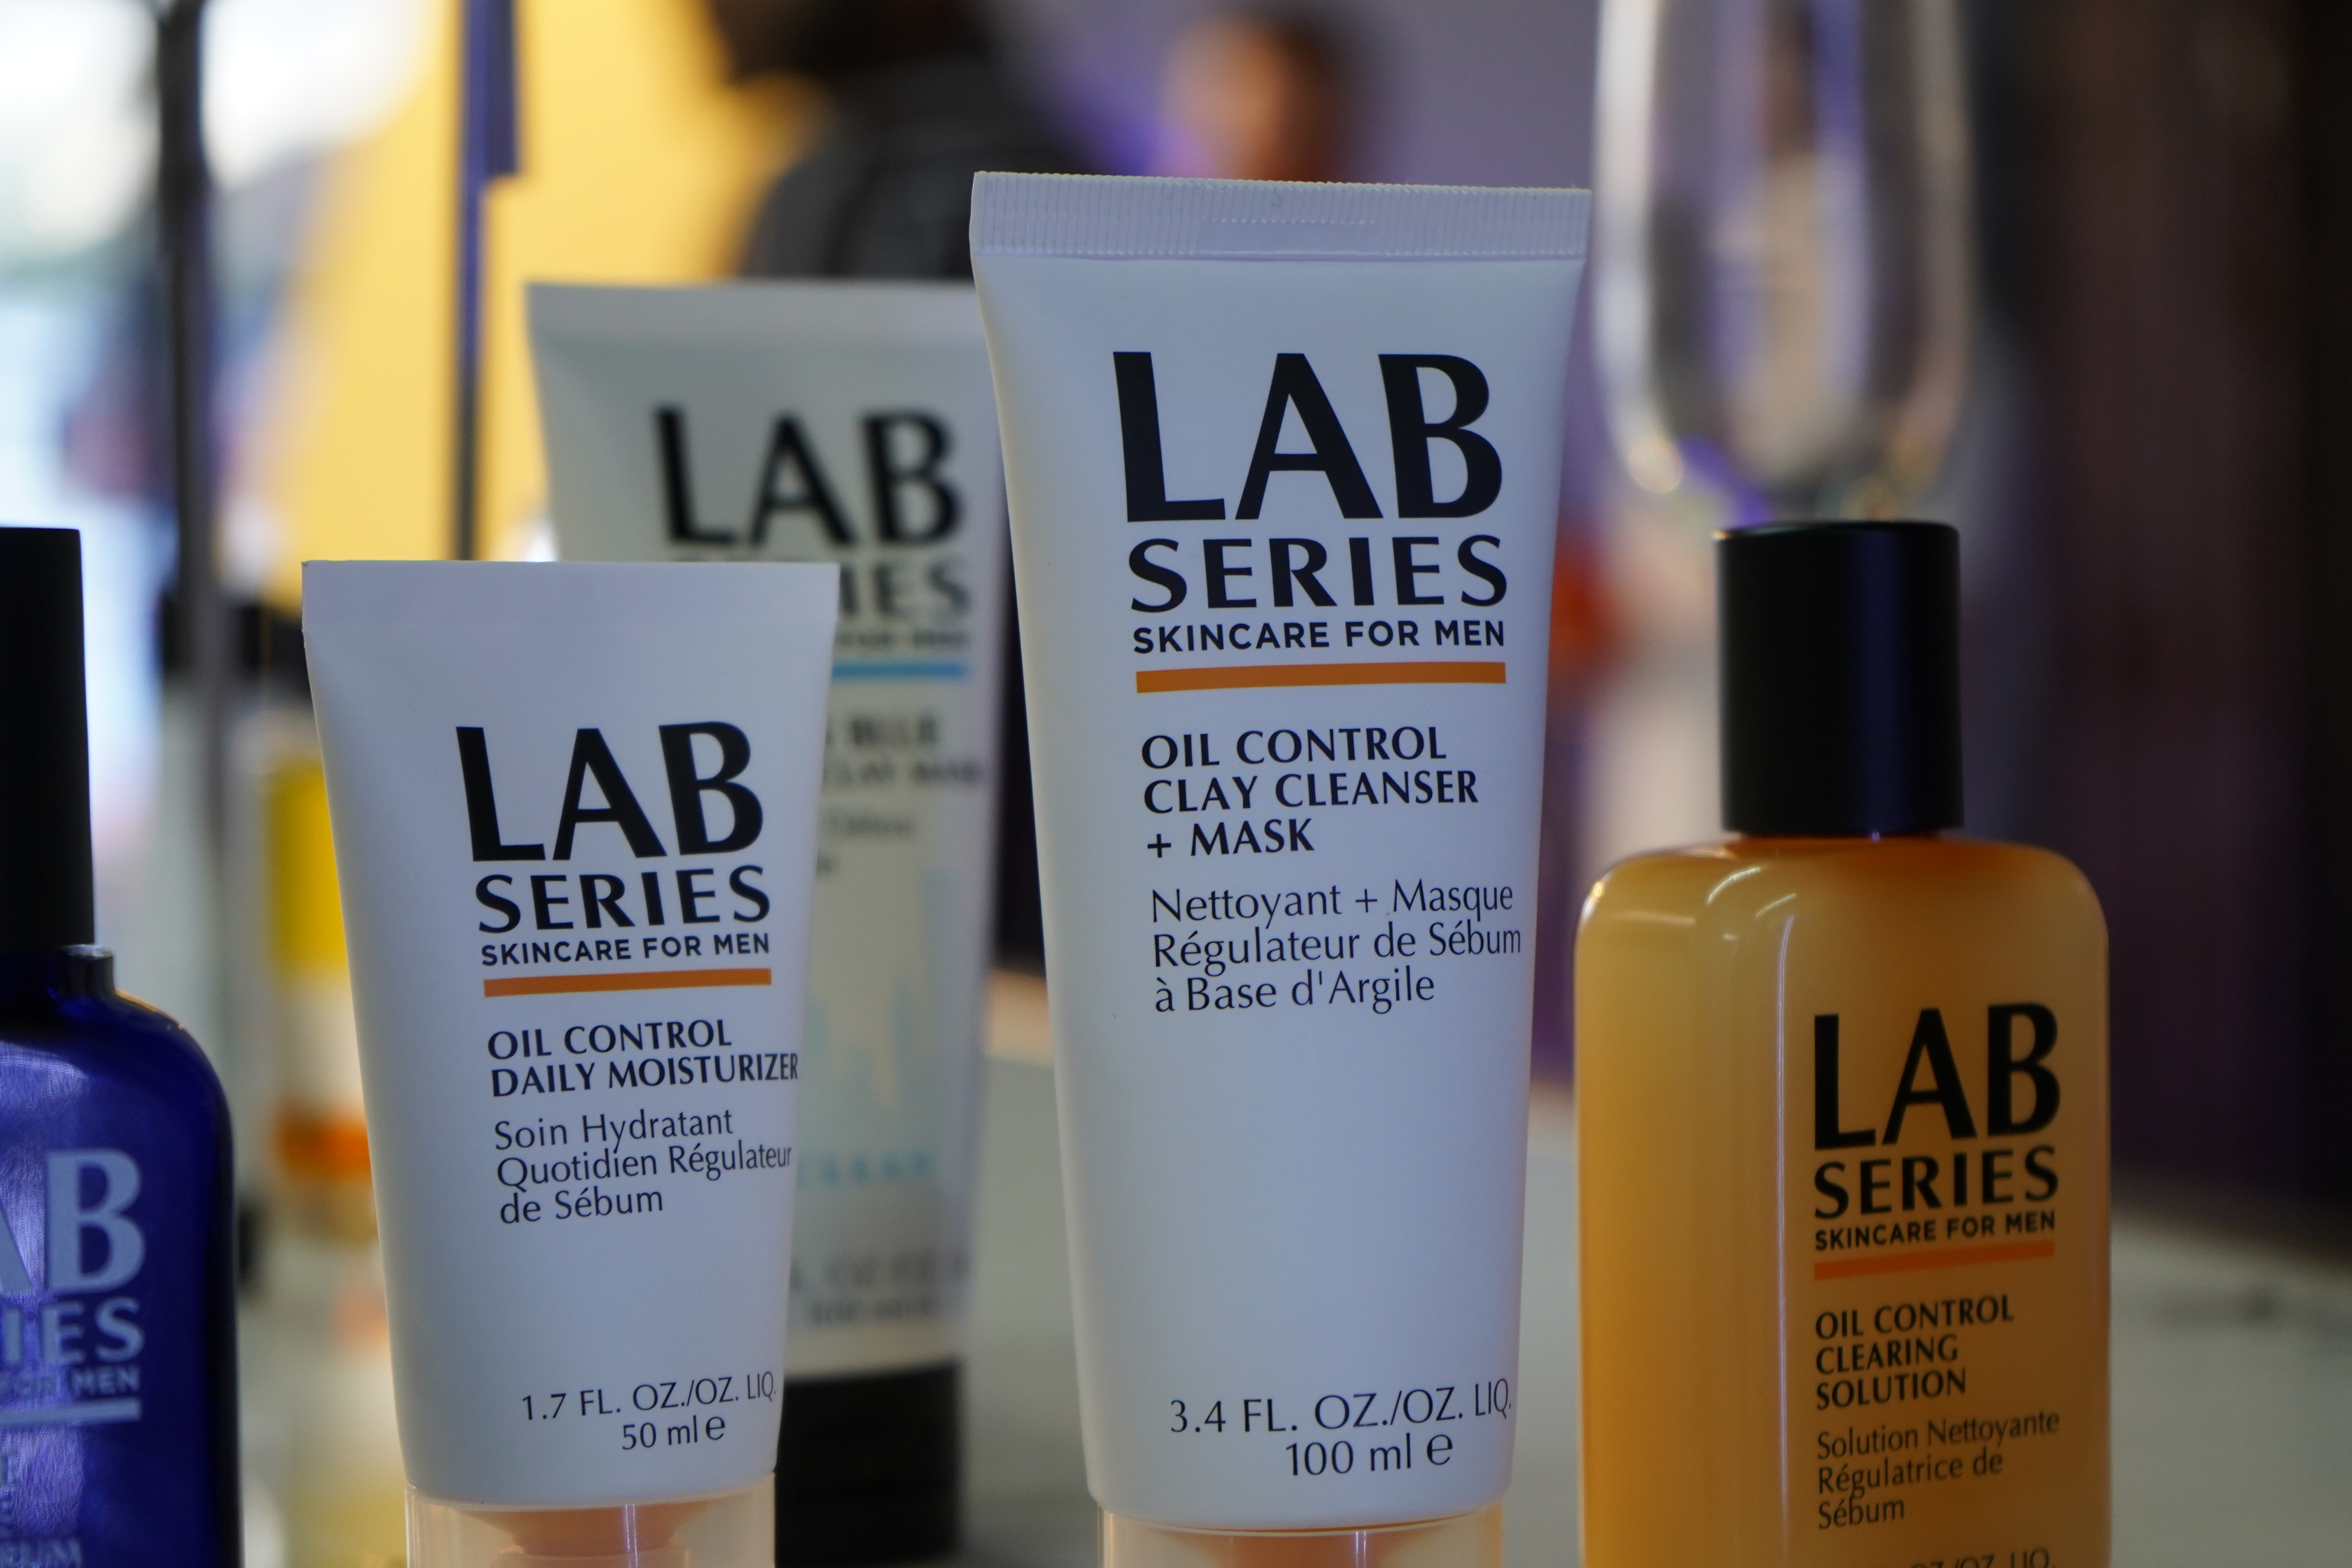 Lab Series Launches A New Oil Control Range